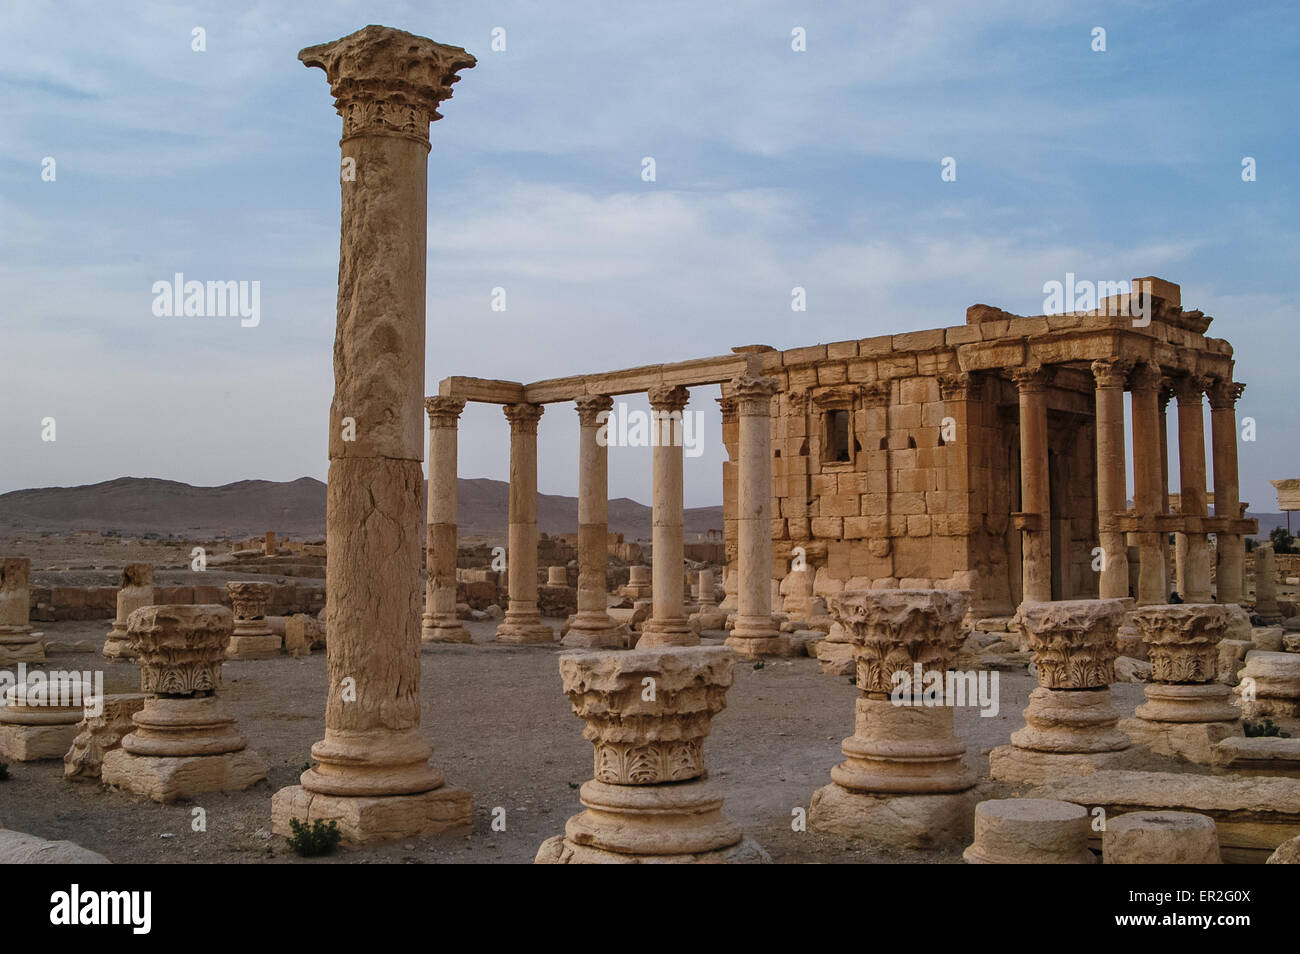 Ancient ruin city of Palmyra in Syria a UNESCO world heritage site of history Stock Photo